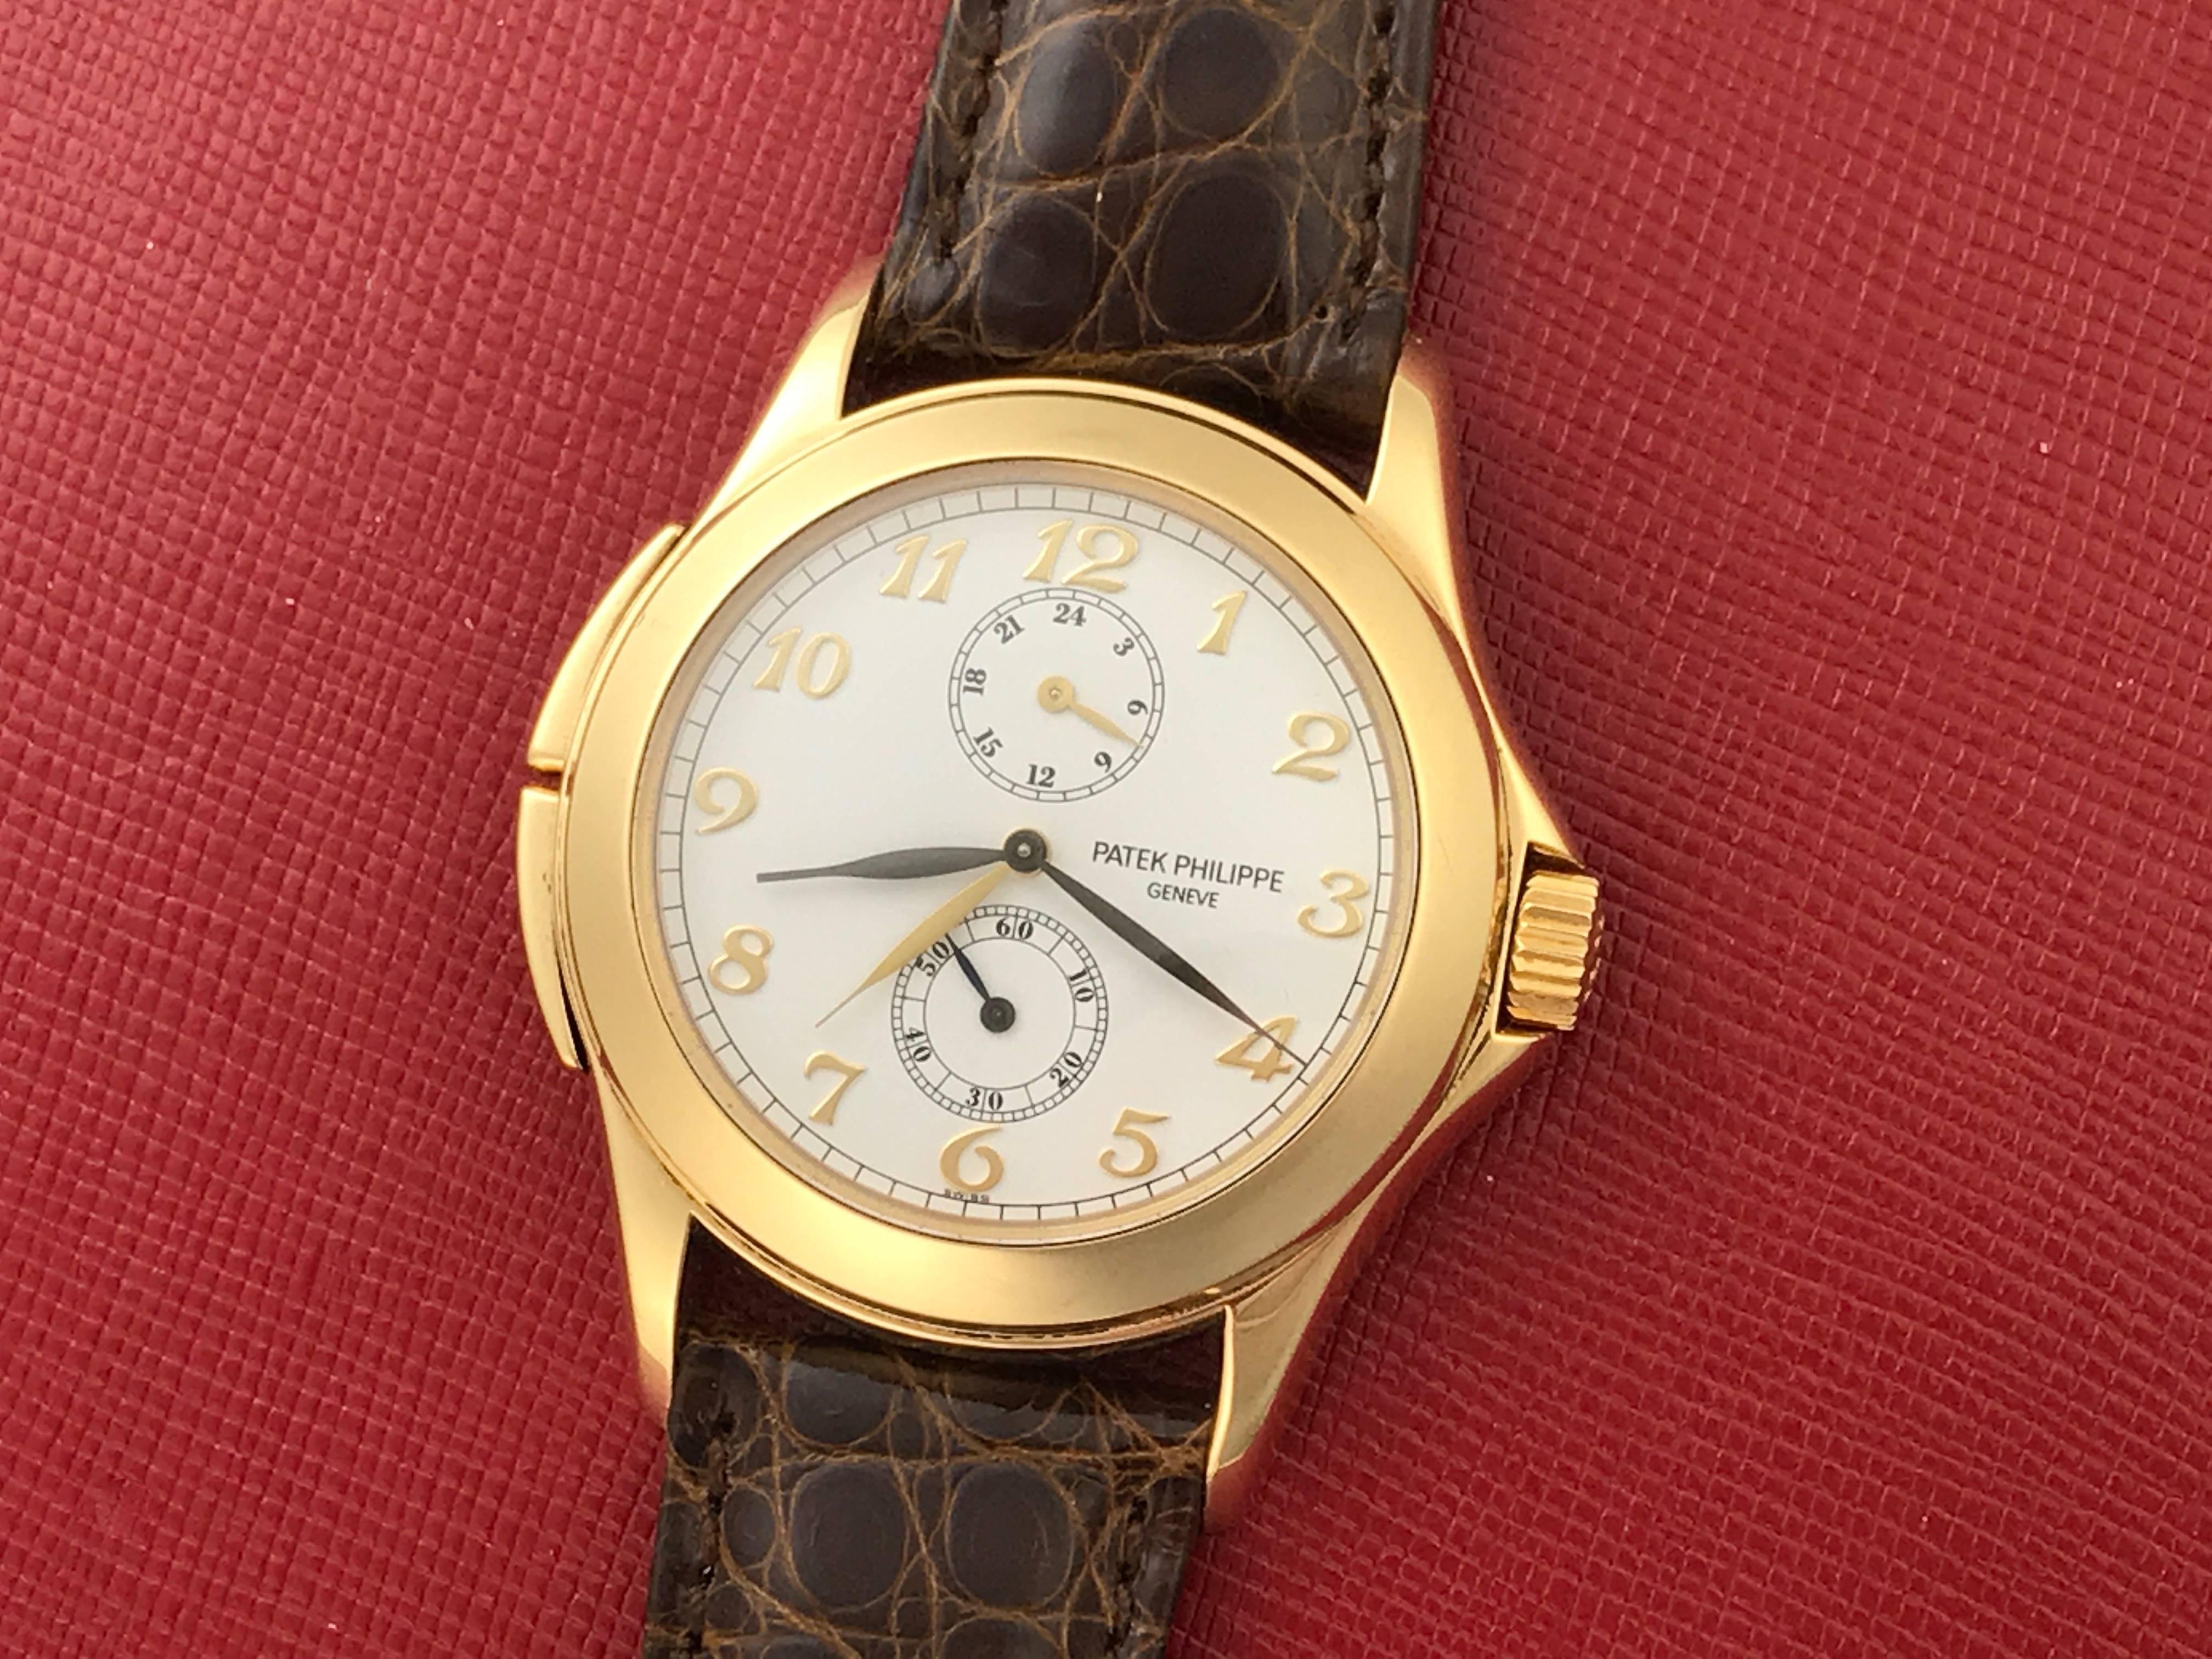 Contemporary Patek Philippe Yellow Gold Travel Time Manual Wind Wristwatch Ref 5134J-001 